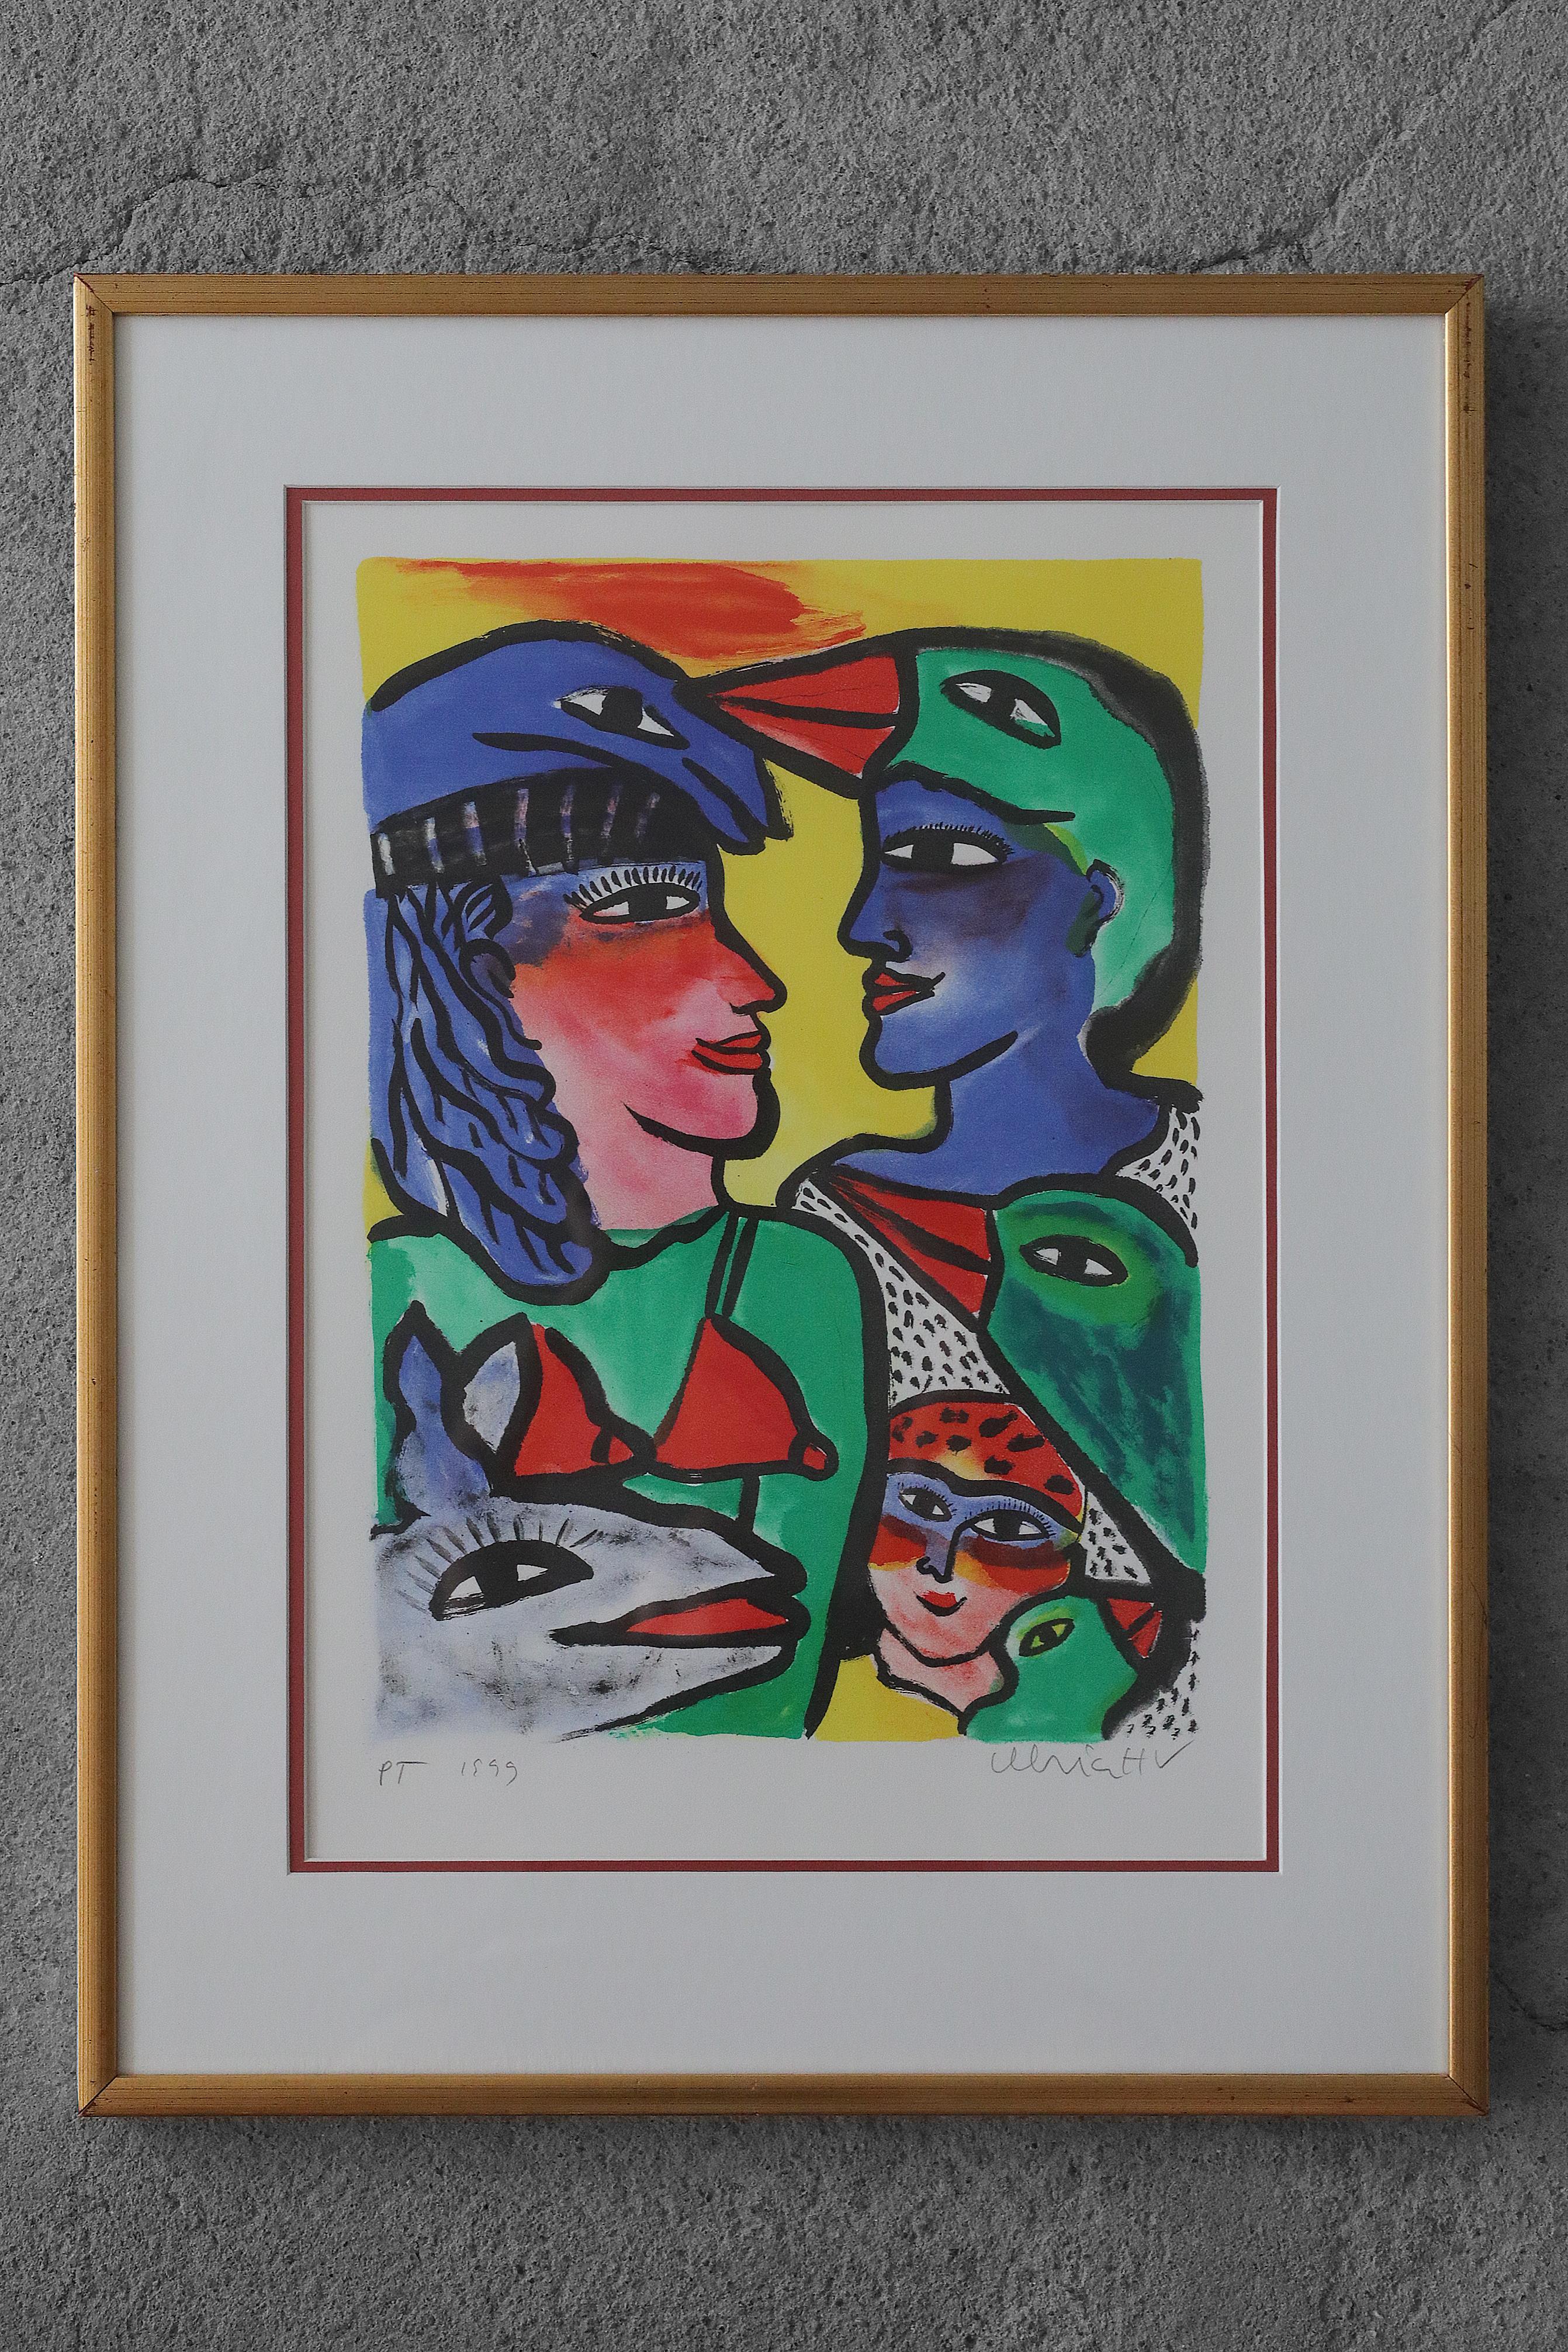 Ulrika Hydman Vallien, Composition of Figures, 1999
Color lithography
Work signed by the artist, dated and signed P.T (pencil)
Sheet dimensions 65/50
Framed work

Ulrika Hydman Vallien (1938 to 2018) was a Swedish artist who specialized in stained